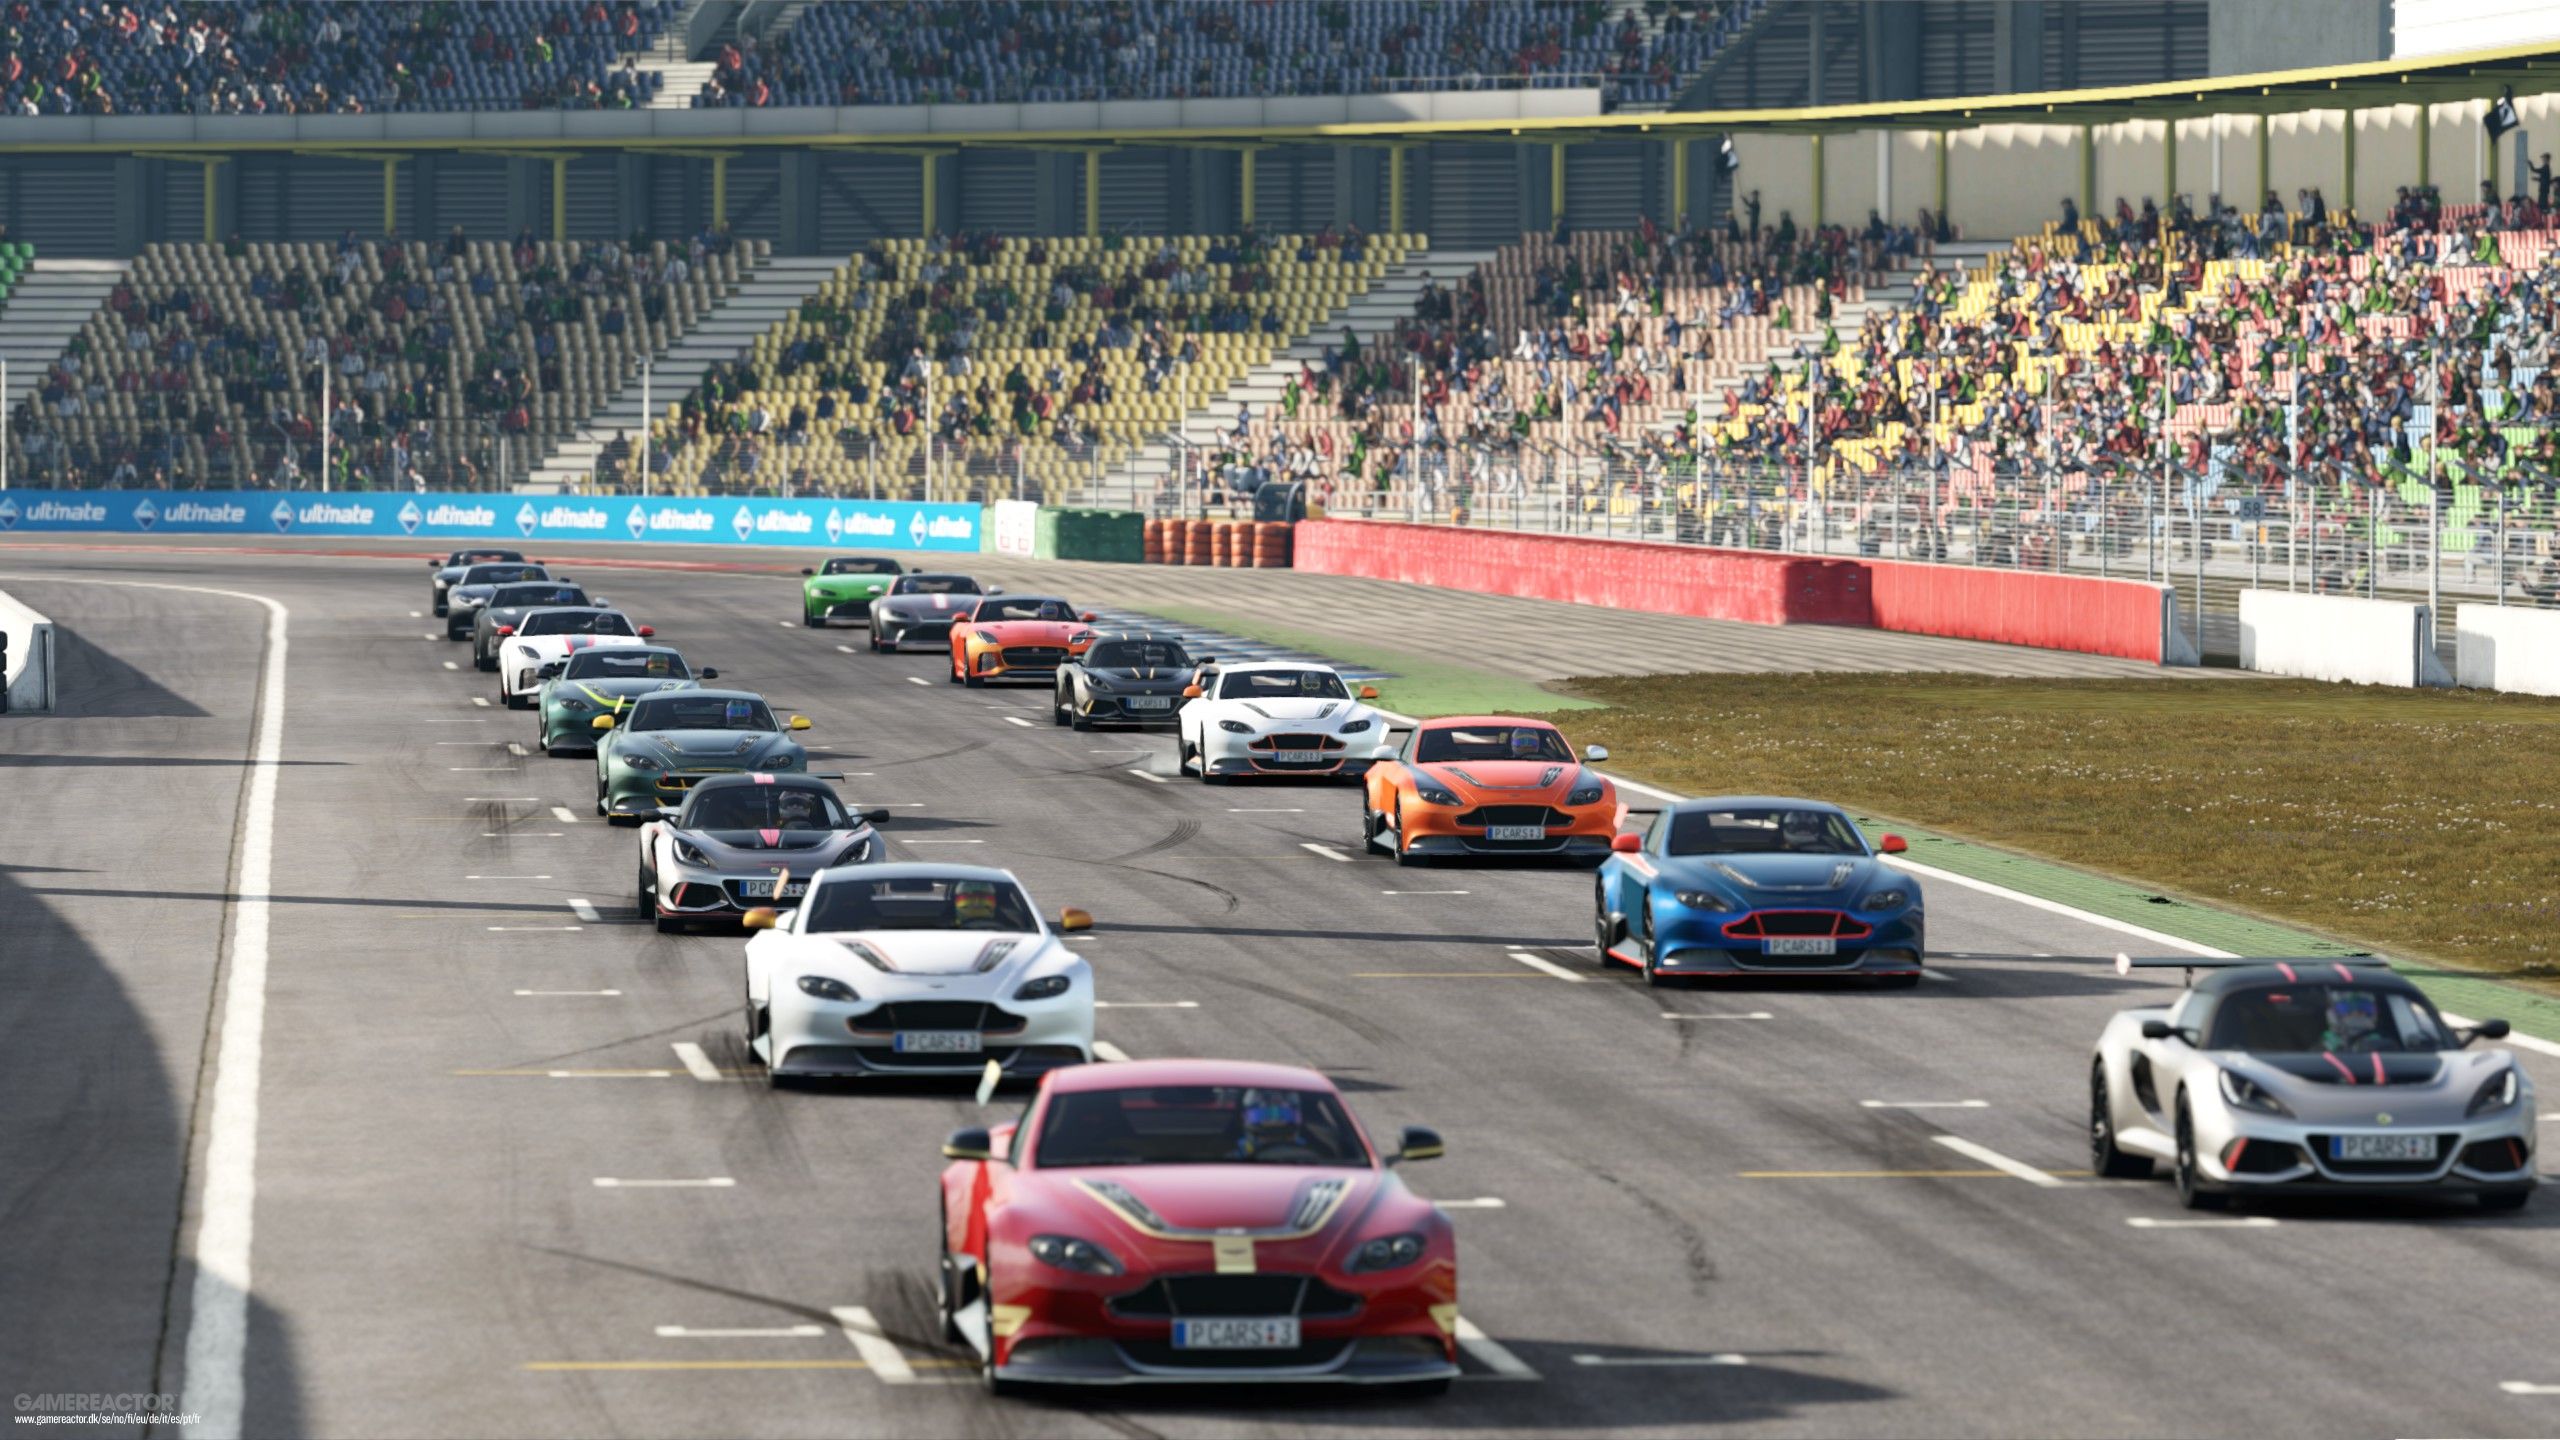 Project Cars 3 is turning its back on racing sim tradition